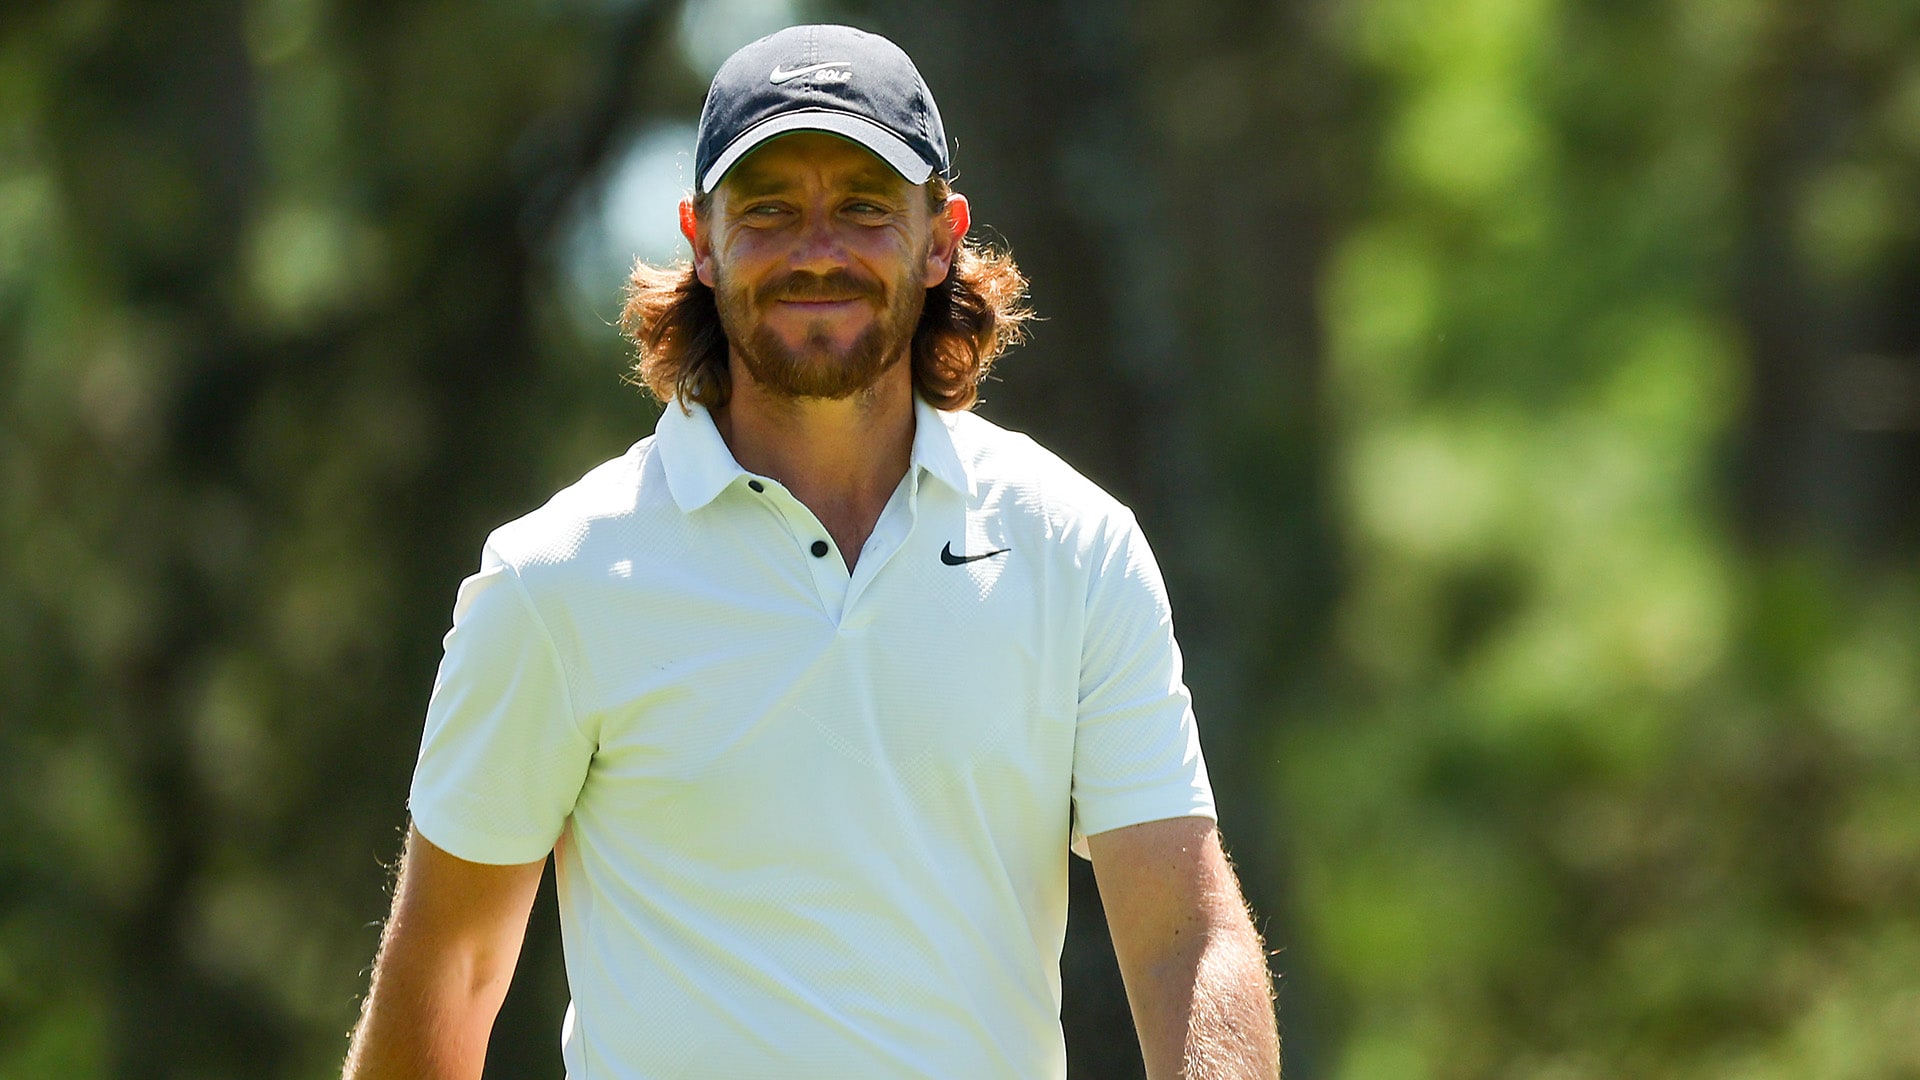 Tommy Fleetwood leads at Quail Hollow as Rory McIlroy shoots 68 in return